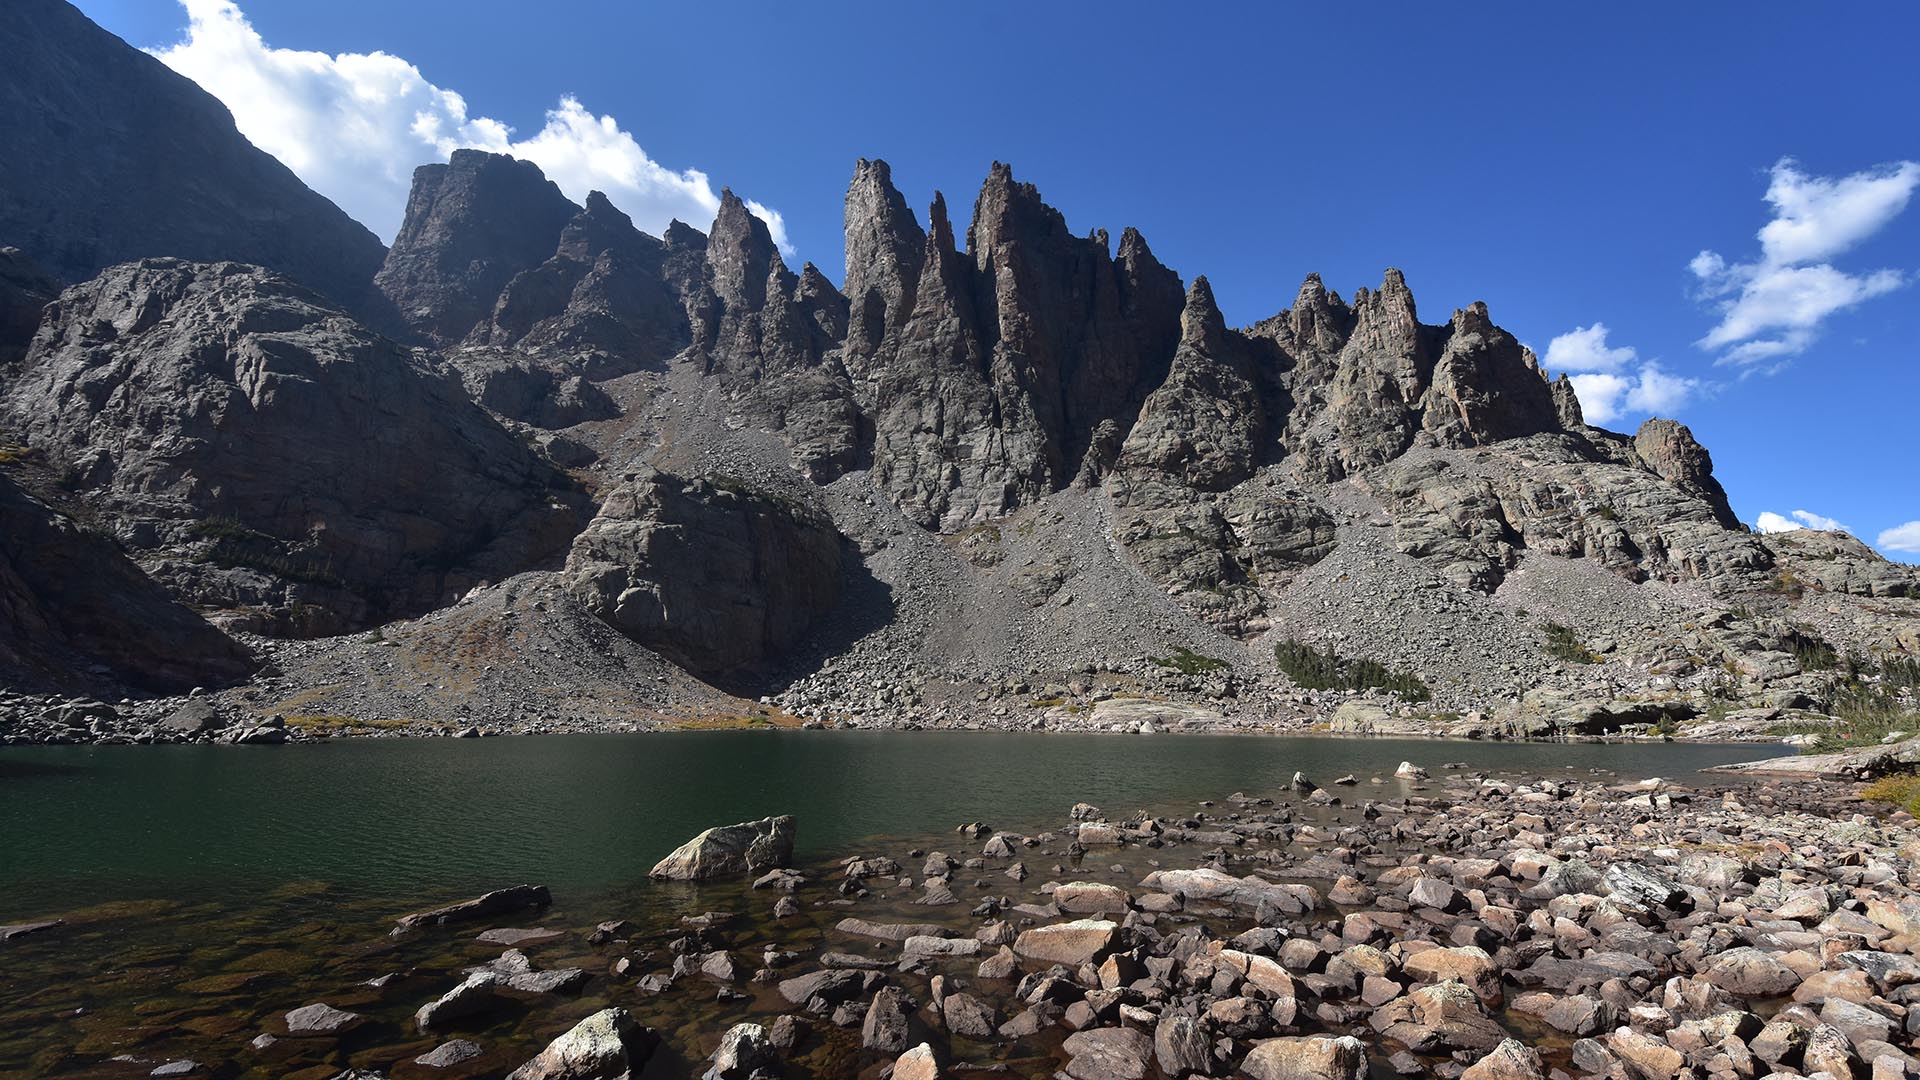 A photo of cliffs and a pound at Sky Pond in scenic Rocky Mountain National Park